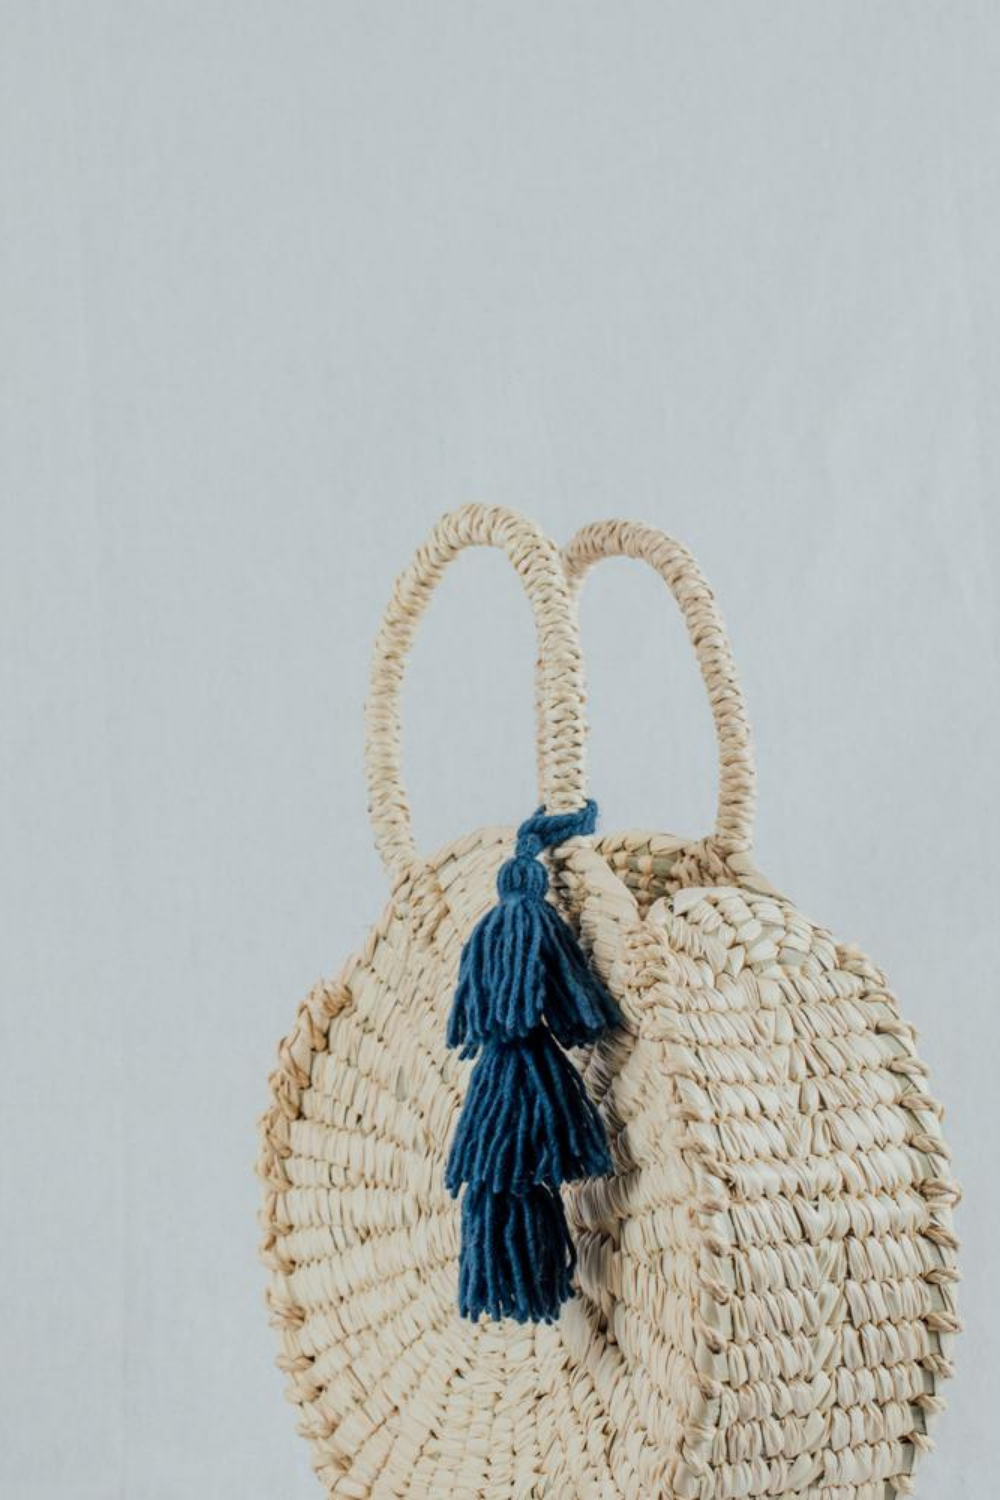 Artisan & Fox - Clutches & Bags - CIRCULO Handwoven Palm Bag in Petite - Handcrafted in Mexico